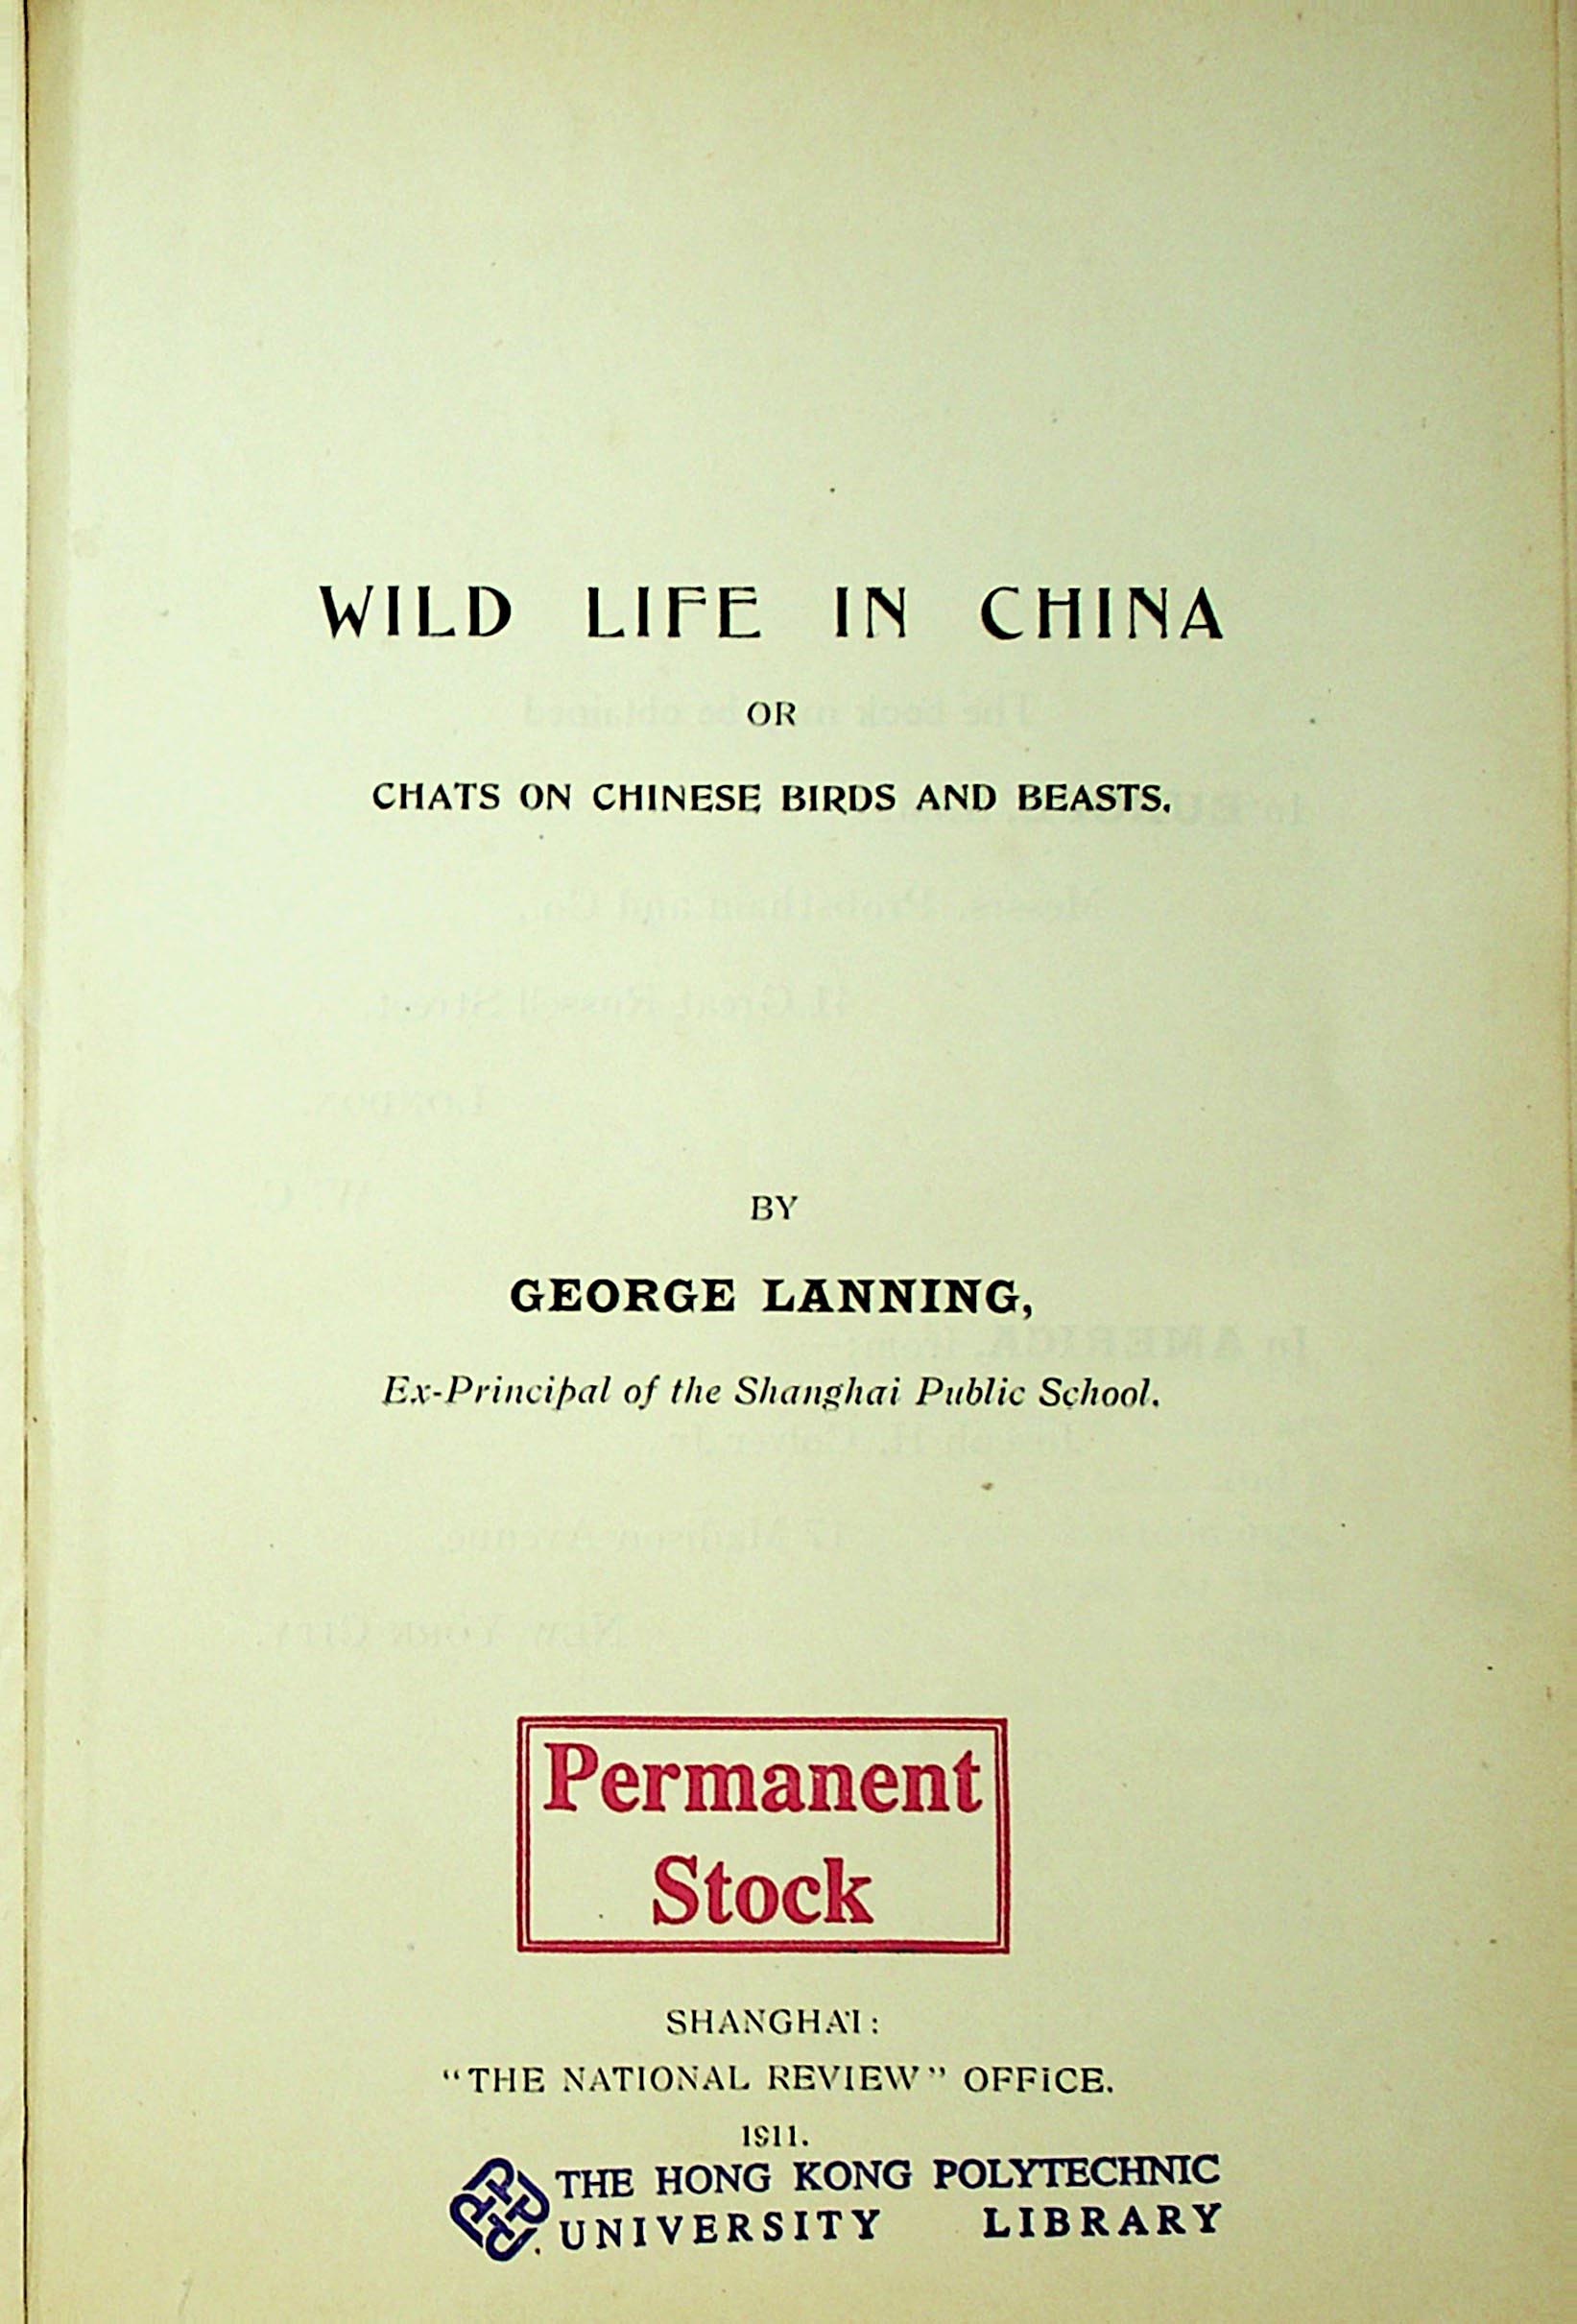 Wild life in China, or, Chats on Chinese birds and beasts